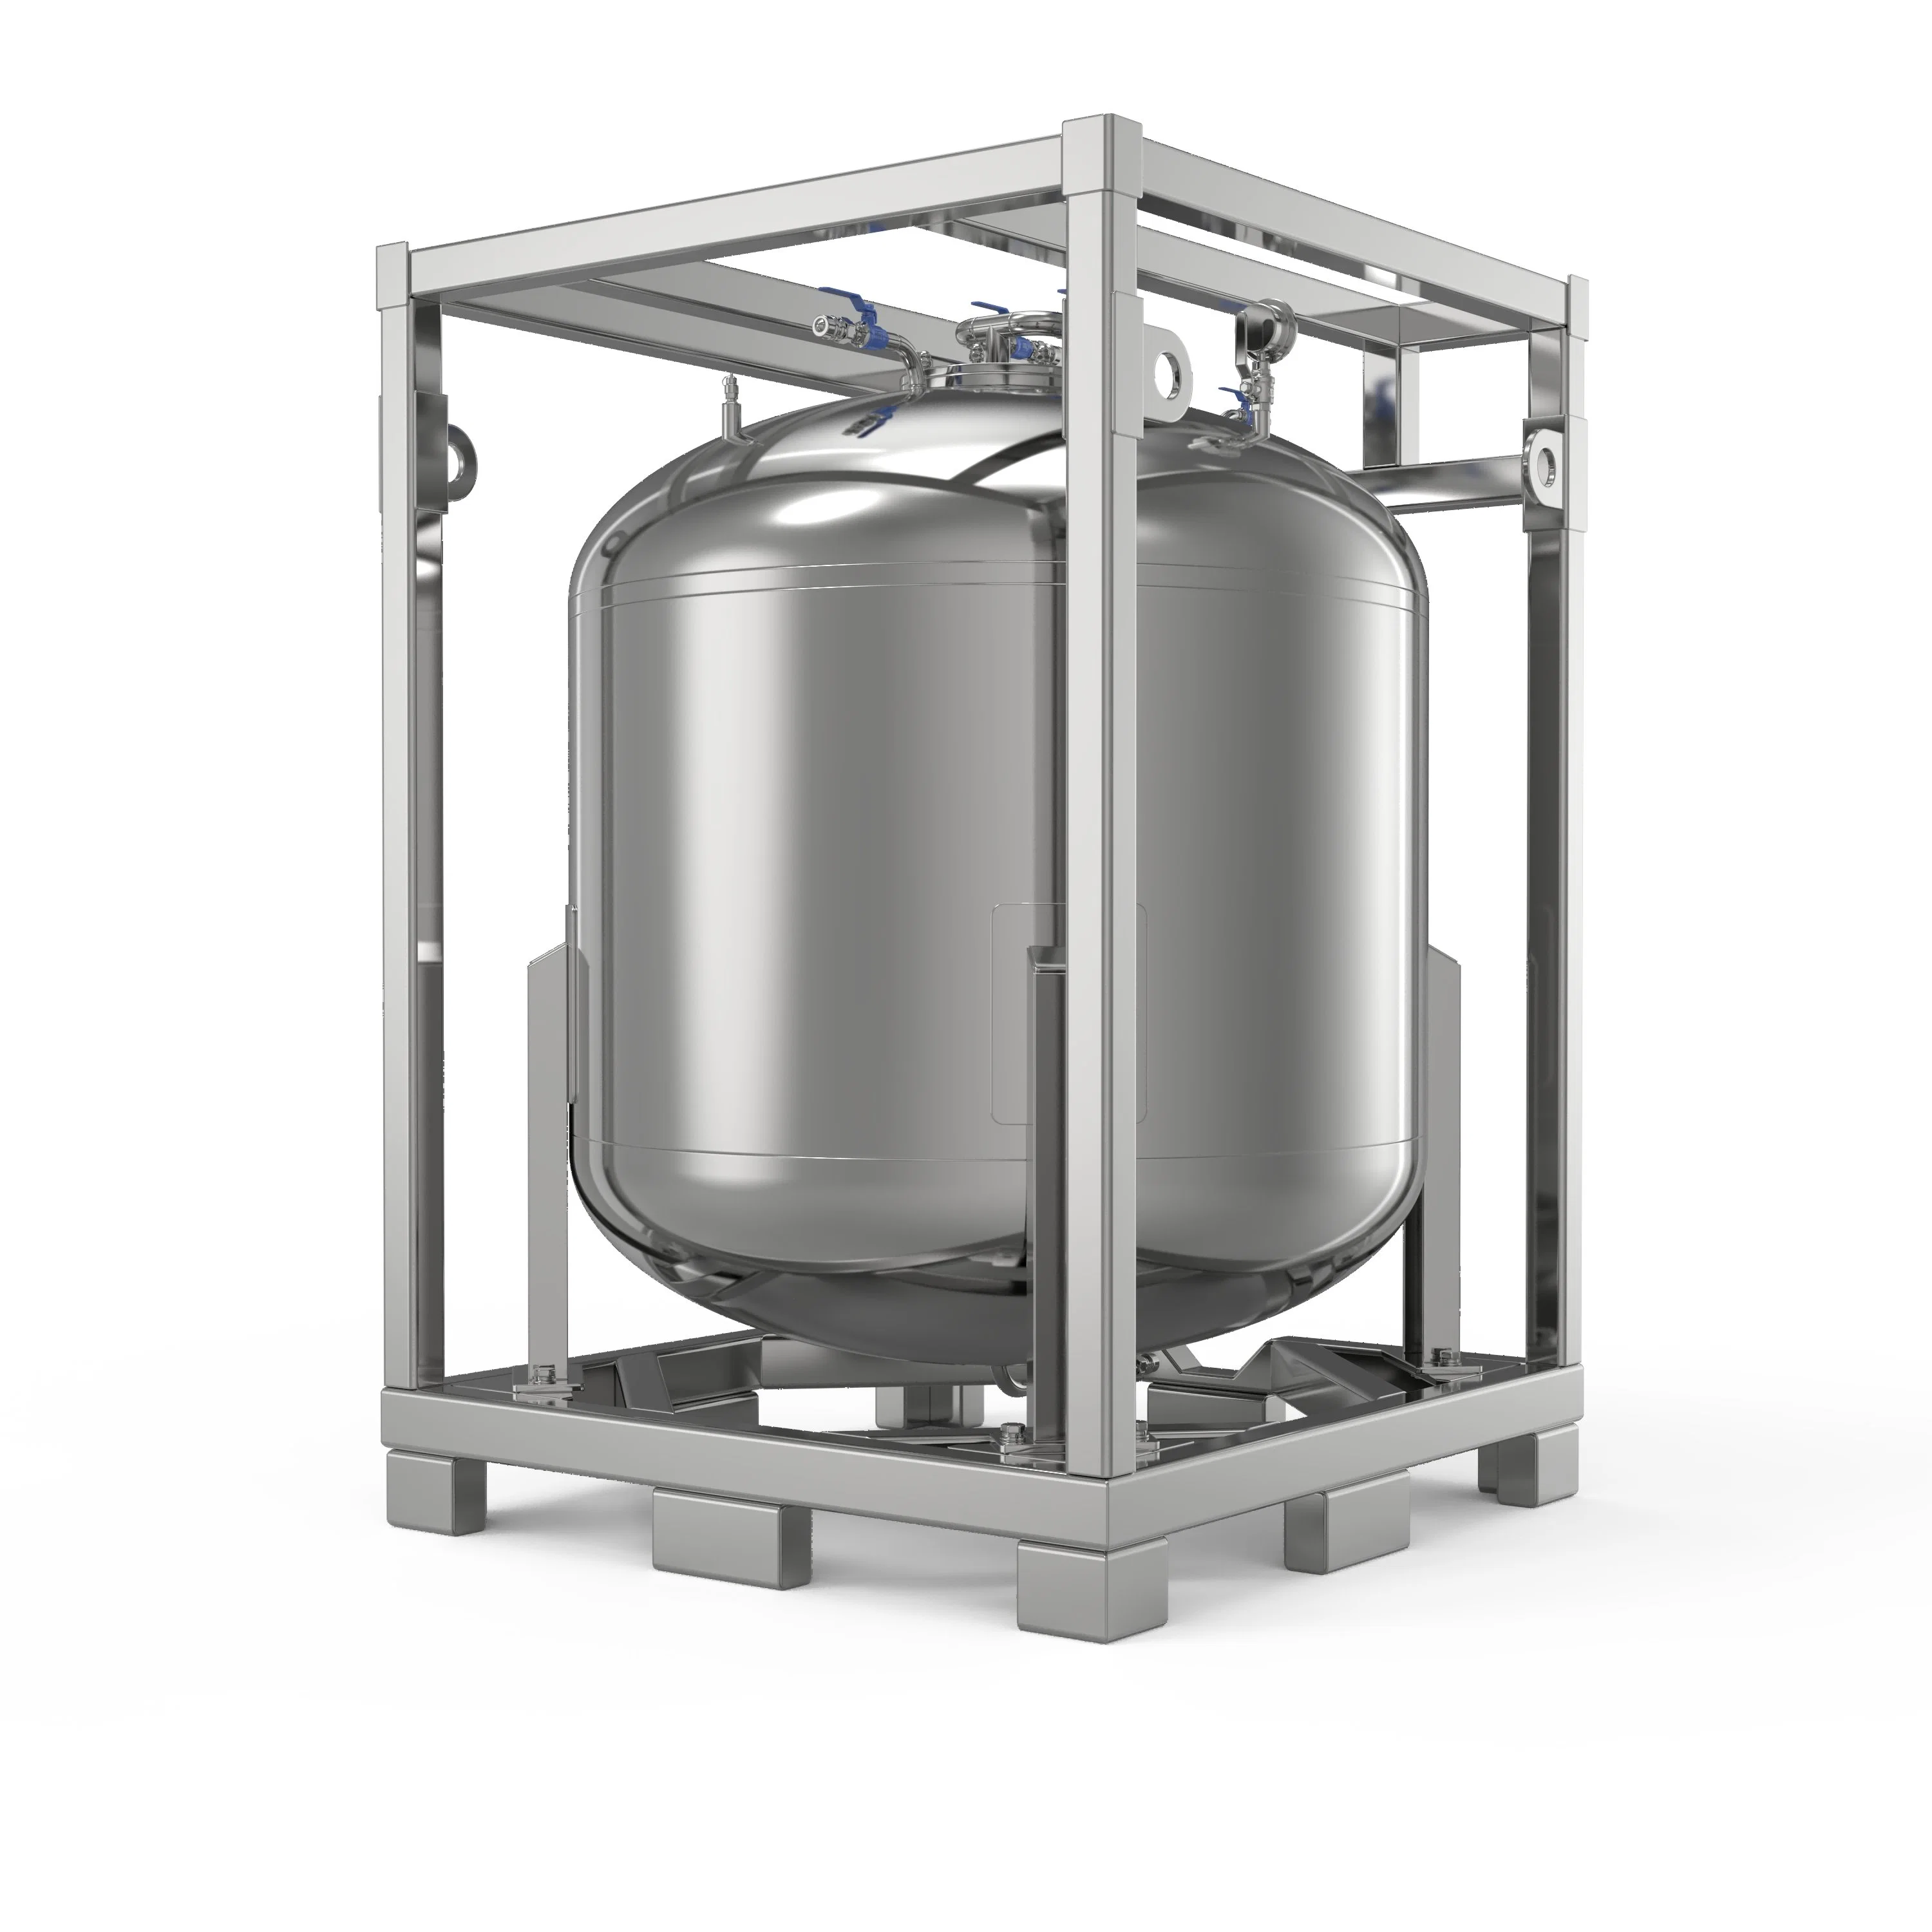 Customized 792L Stainless Steel Tank for Chemical Powder Storage and Transportation